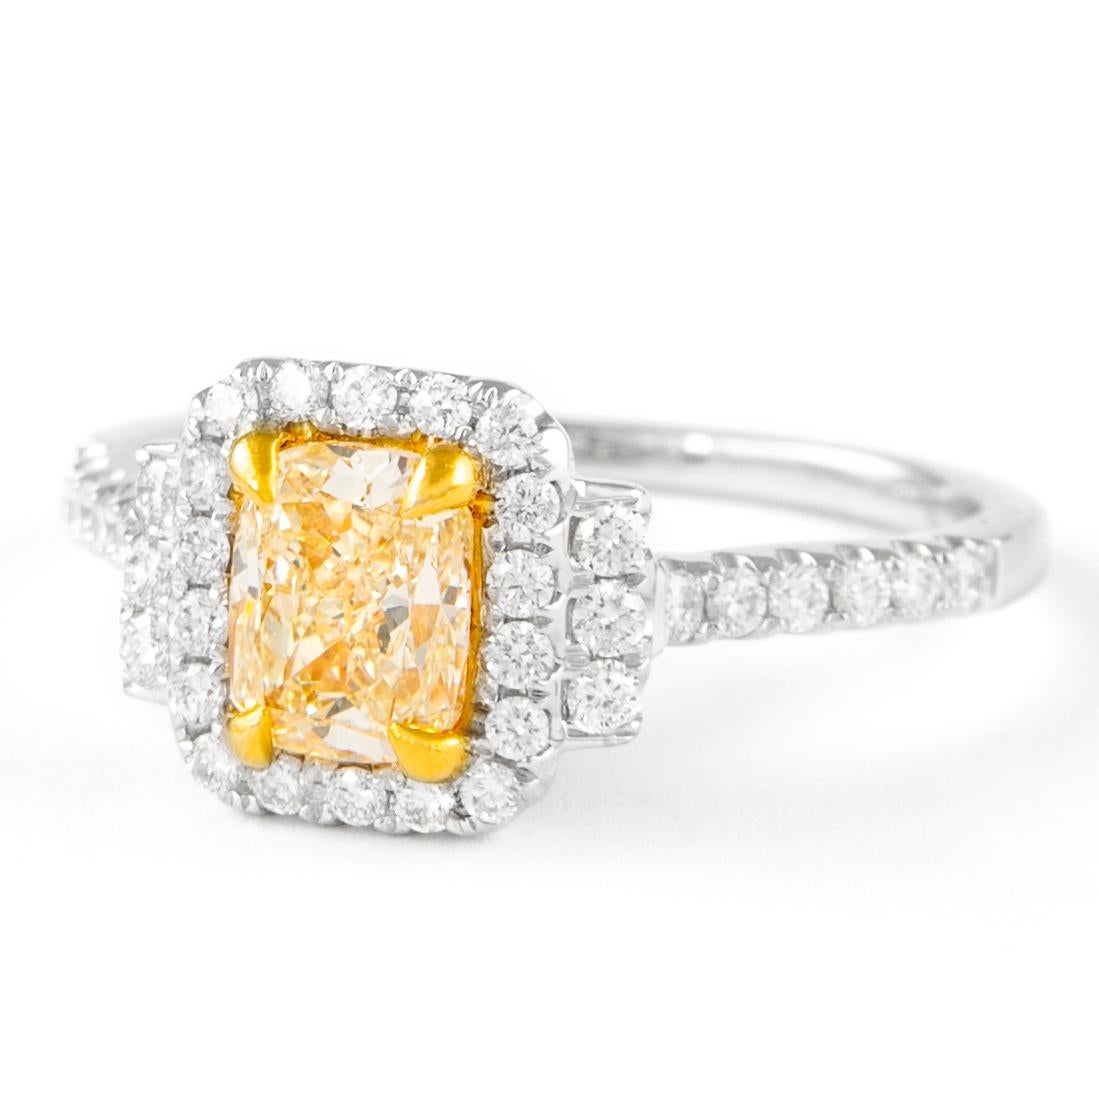 Contemporary Alexander 1.39ctt Fancy Yellow VS2 Cushion Diamond with Halo Ring 18k Two Tone For Sale